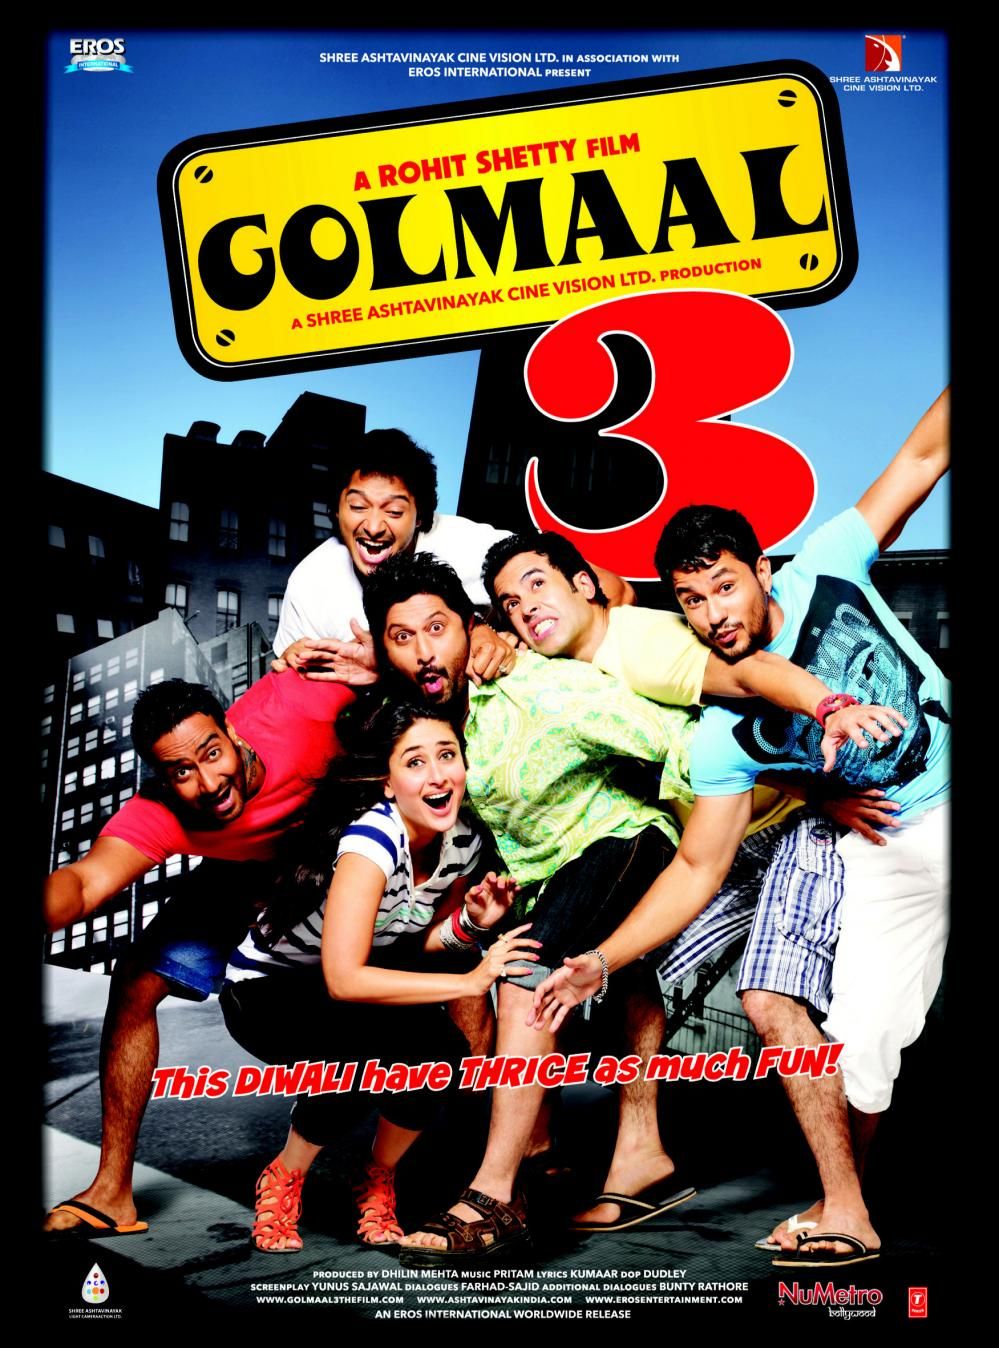 Extra Large Movie Poster Image for Golmaal 3 